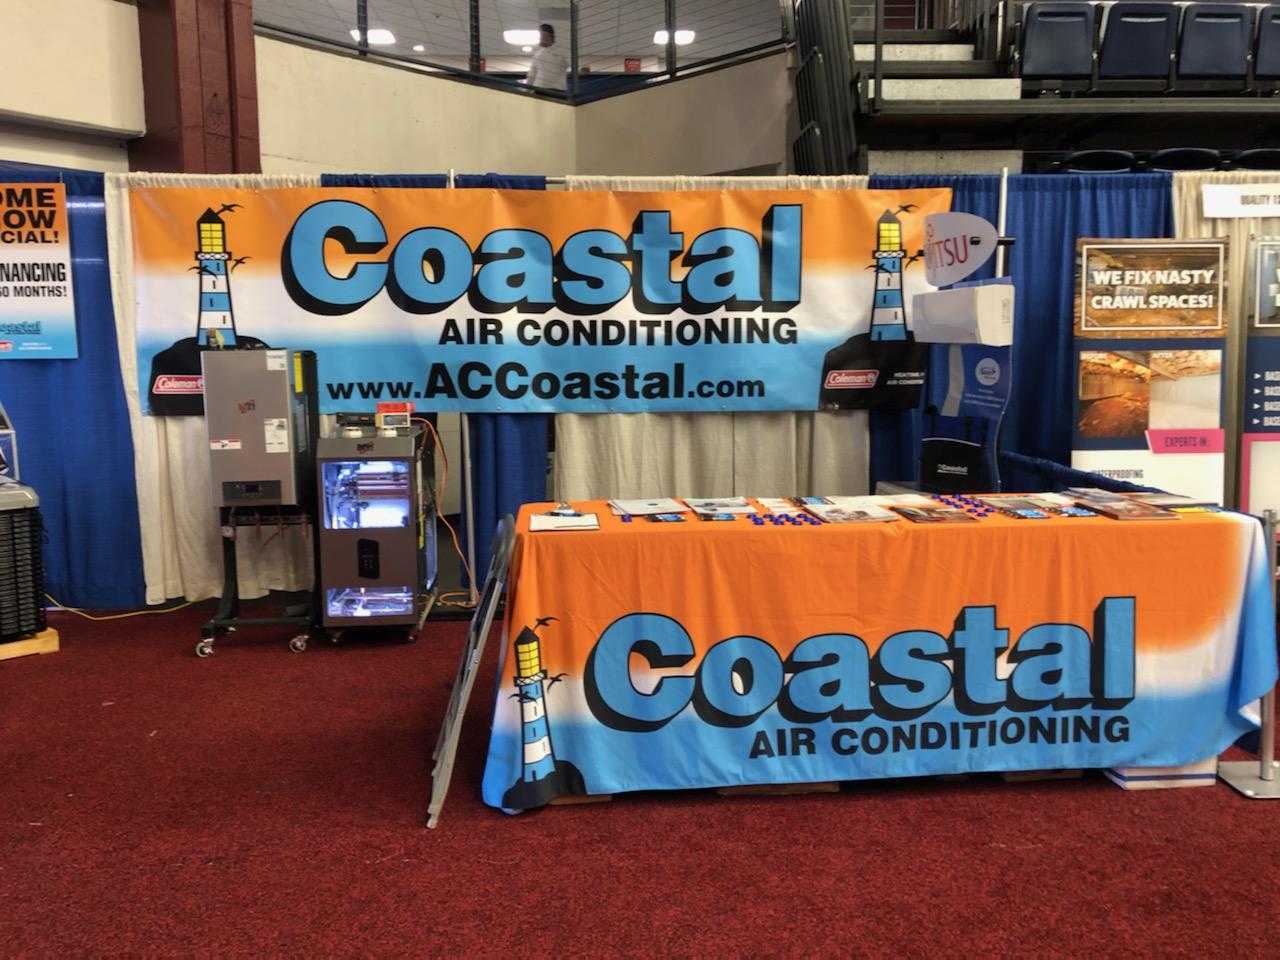 Coastal Air Conditioning Trade Show Display and Tablecloth